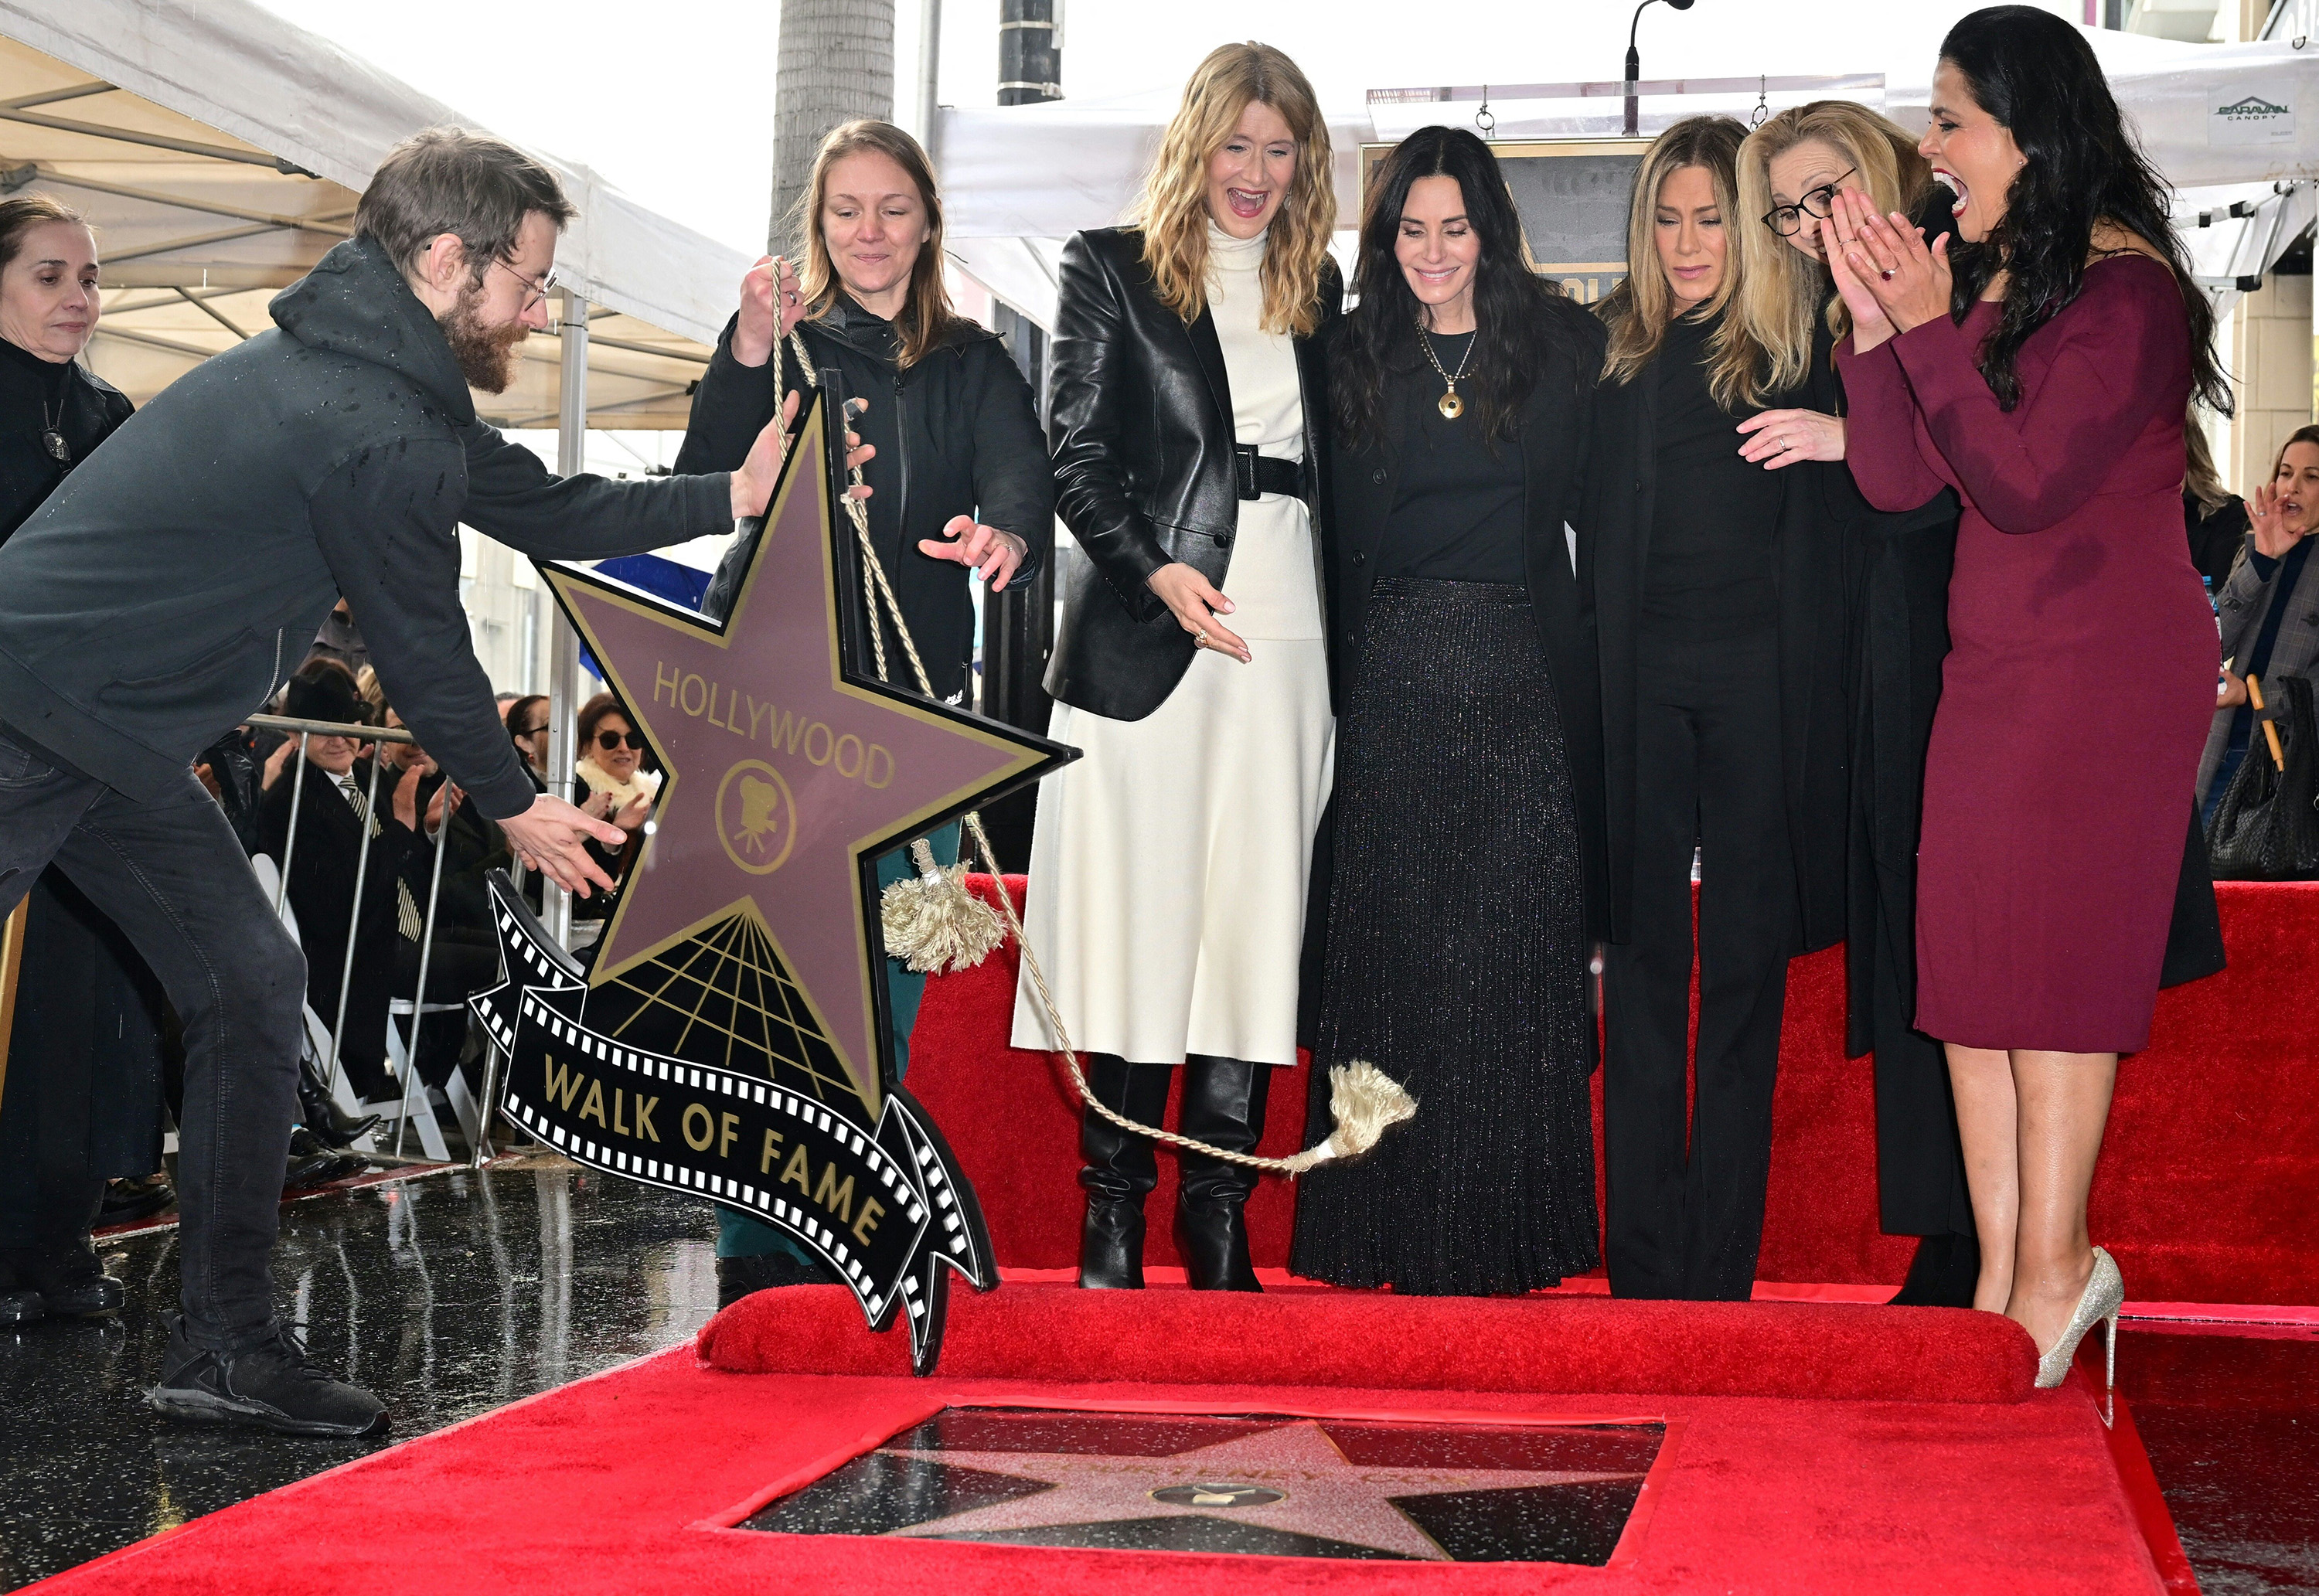 (L-R) Laura Dern, Courteney Cox, Jennifer Aniston, Lisa Kudrow, and Hollywood Chamber of Commerce Chair Lupita Sanchez Cornejo react as Cox's Hollywood Walk of Fame star in unveiled during a ceremony on Feb. 27, 2023, in Hollywood, Calif.